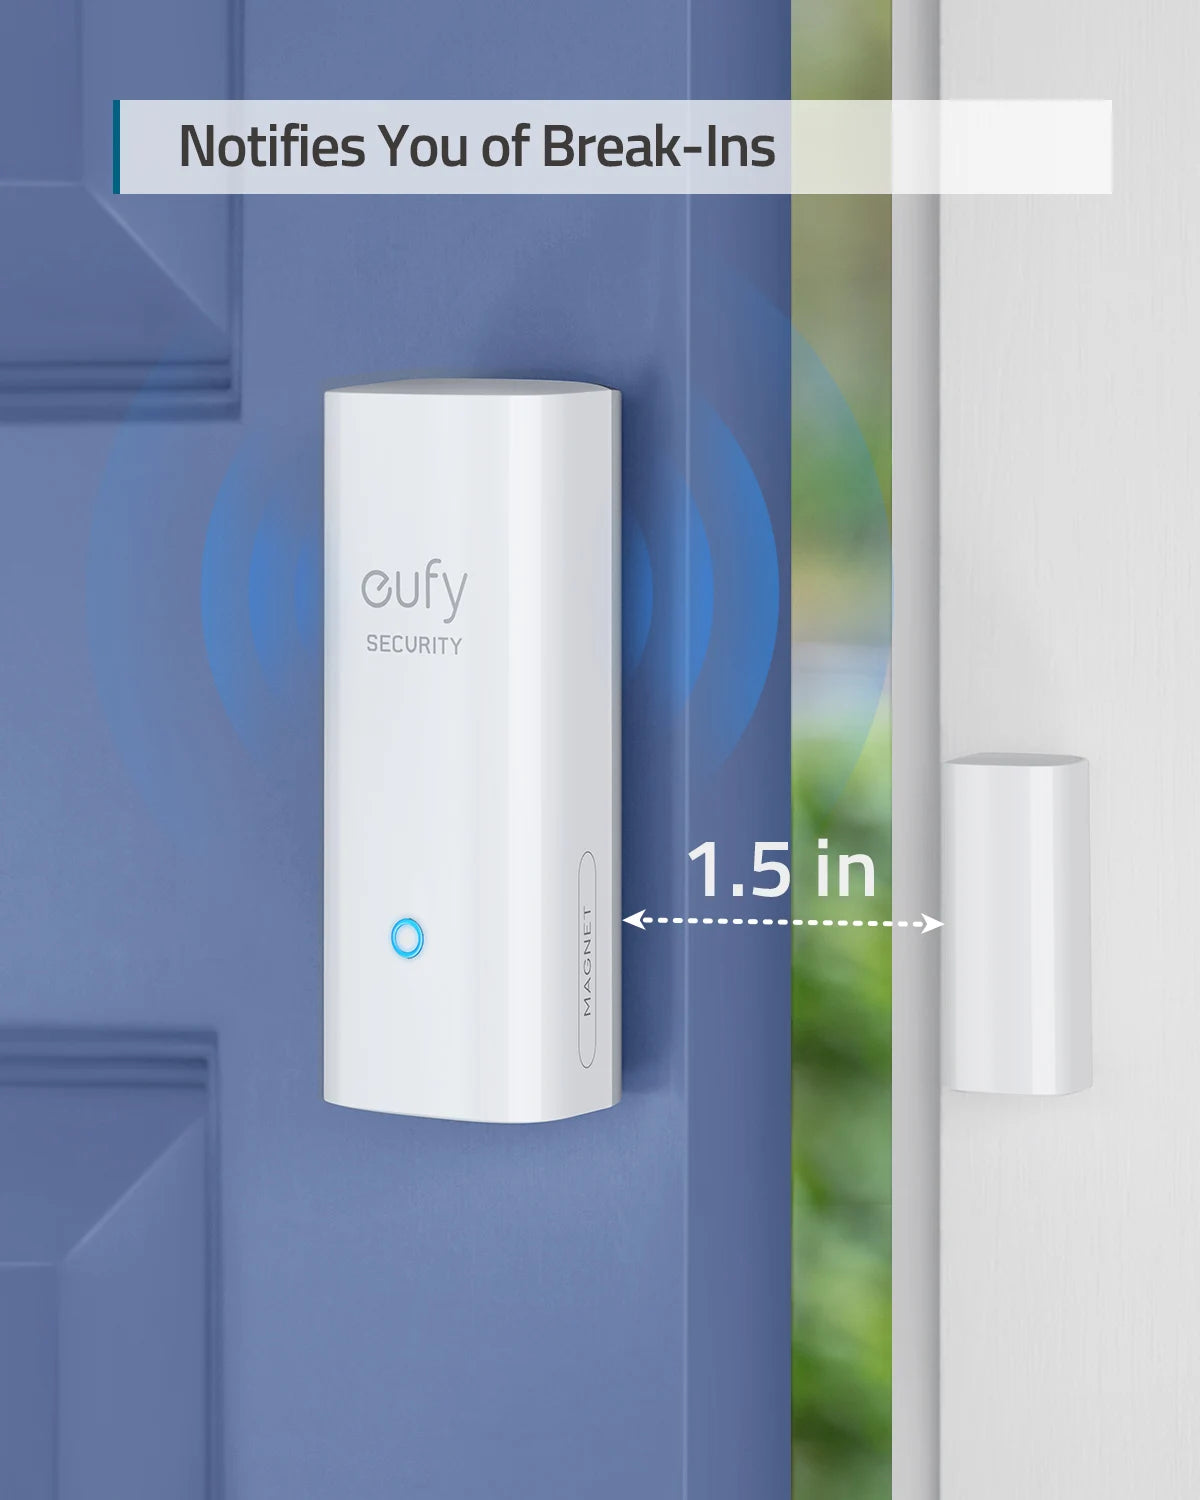 eufy Security Front Door Sensor Detects Smart Home Windows Transmits Alarm Triggers 24/7 Protection Service Requires homebase